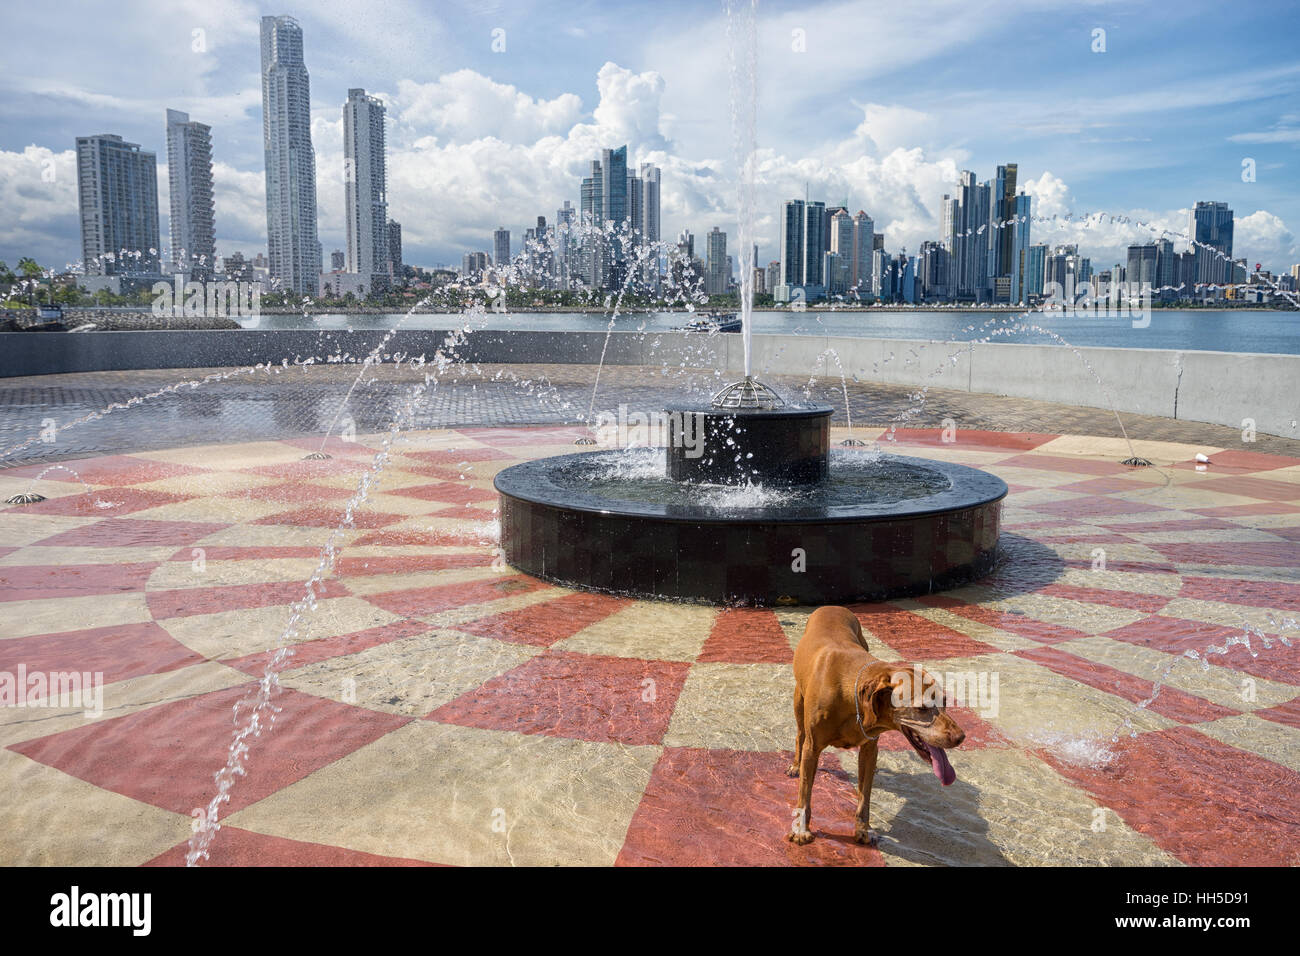 June 15, 2016 Panama City, Panama:  dog standing in the water fountain in the scorching heat of the midday sun with high-rises Stock Photo